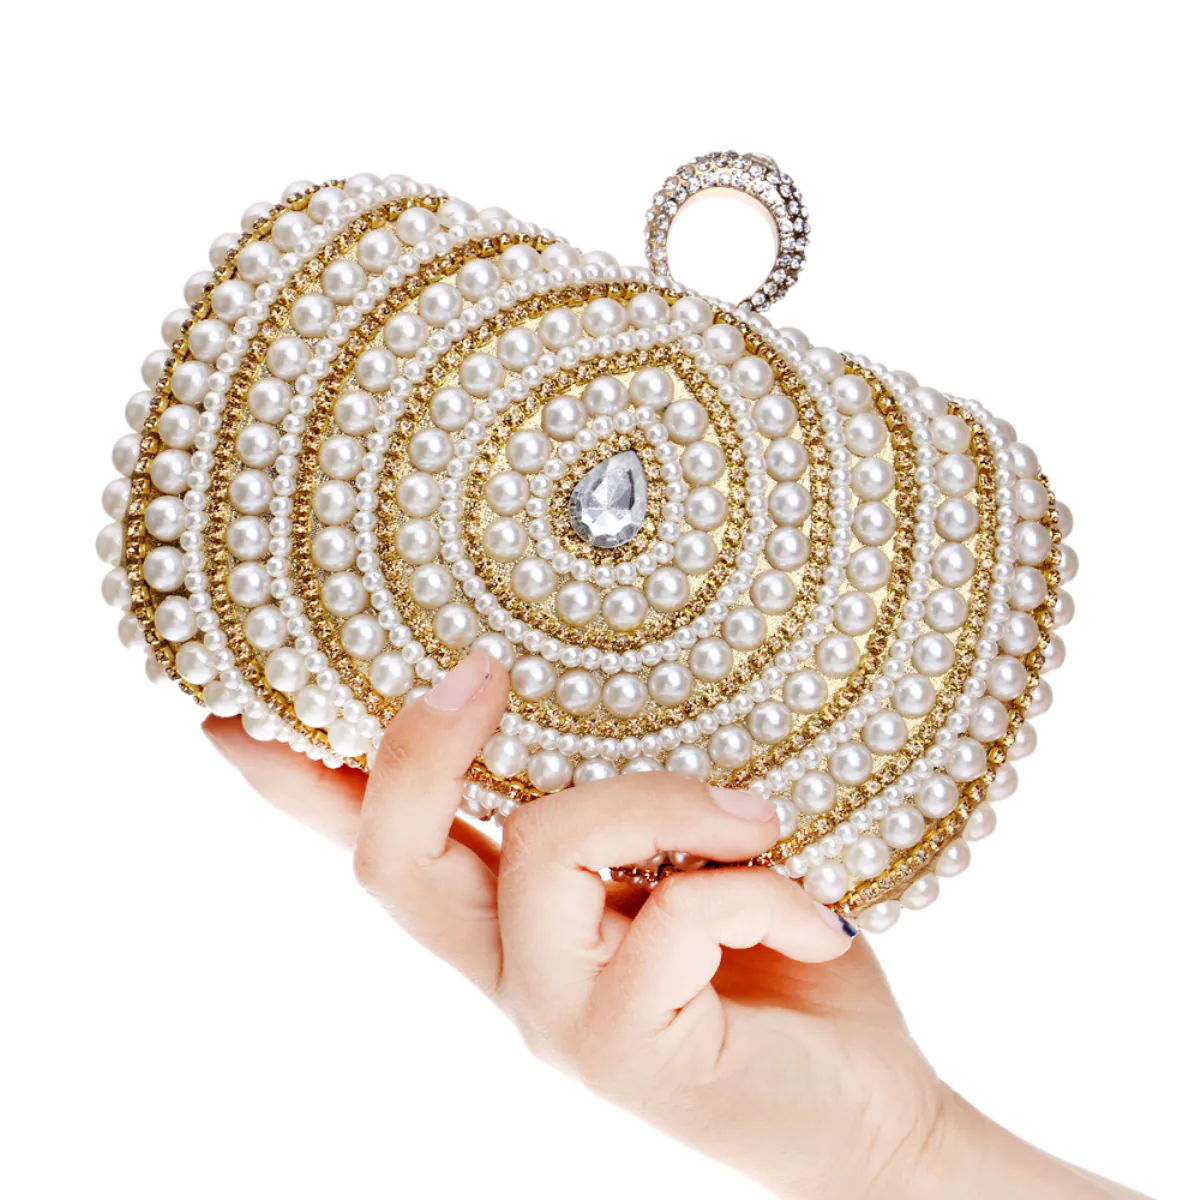 Pearl Beaded Prom Wedding Bride Evening Party Clutch Bag02